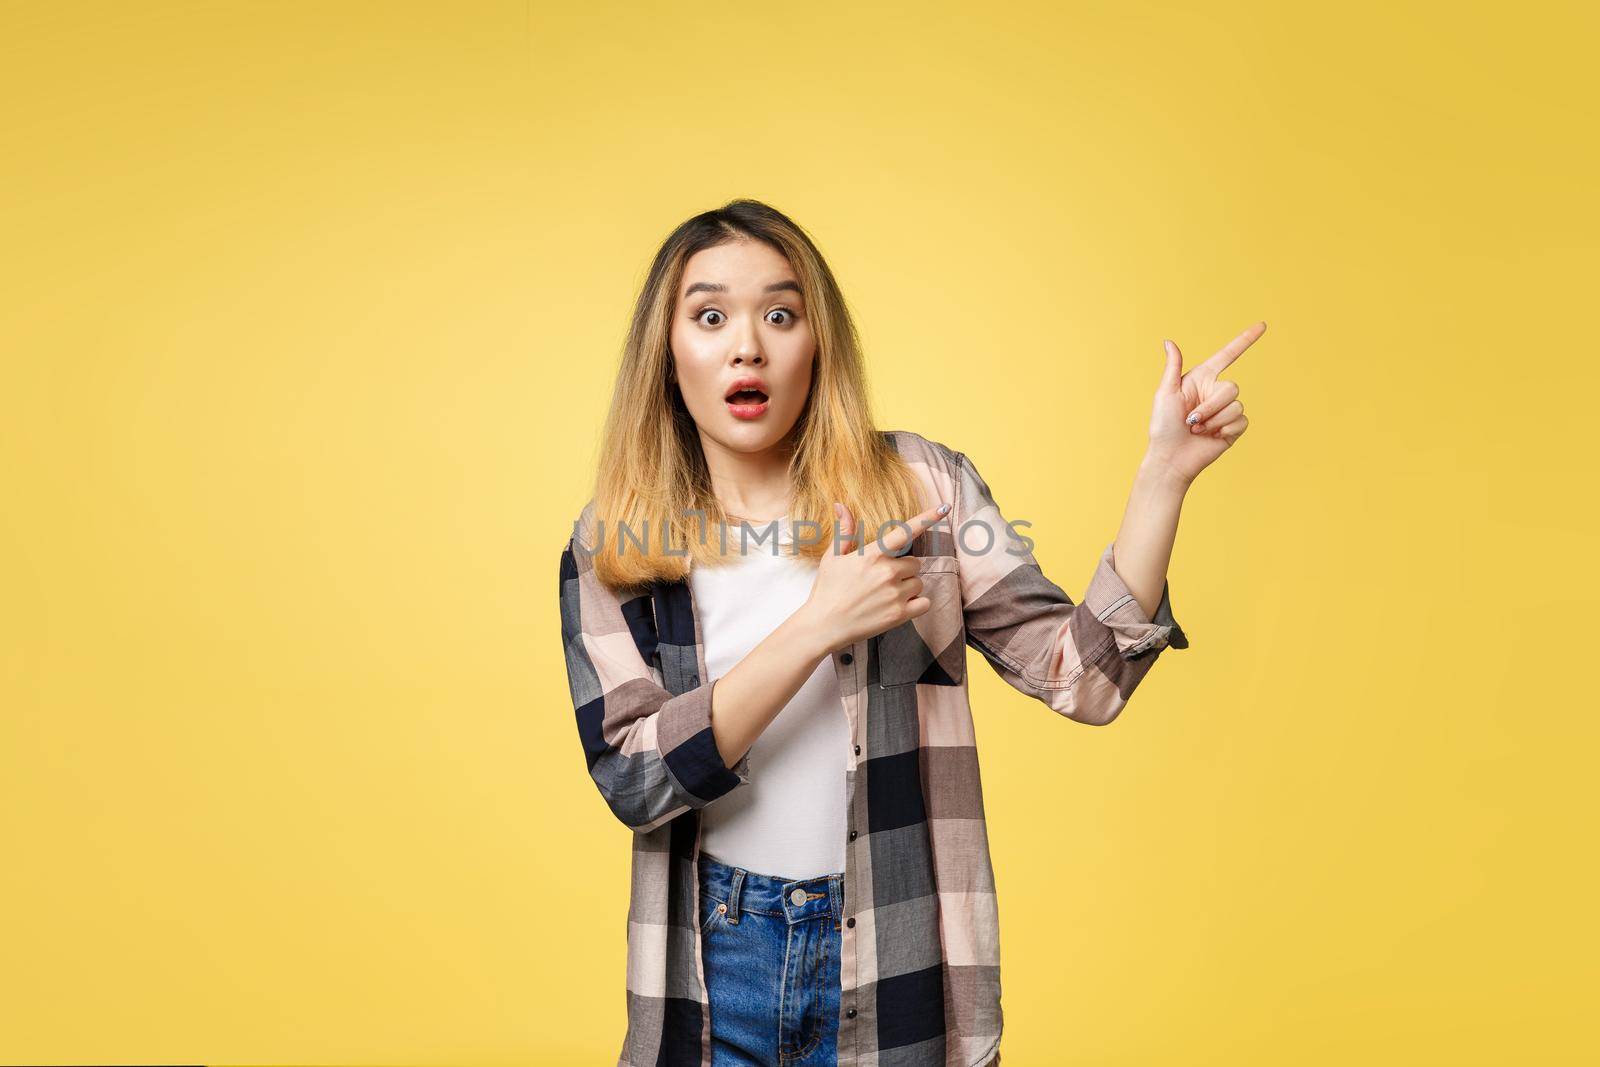 Smiling woman pointing finger side. Isolated portrait on yellow